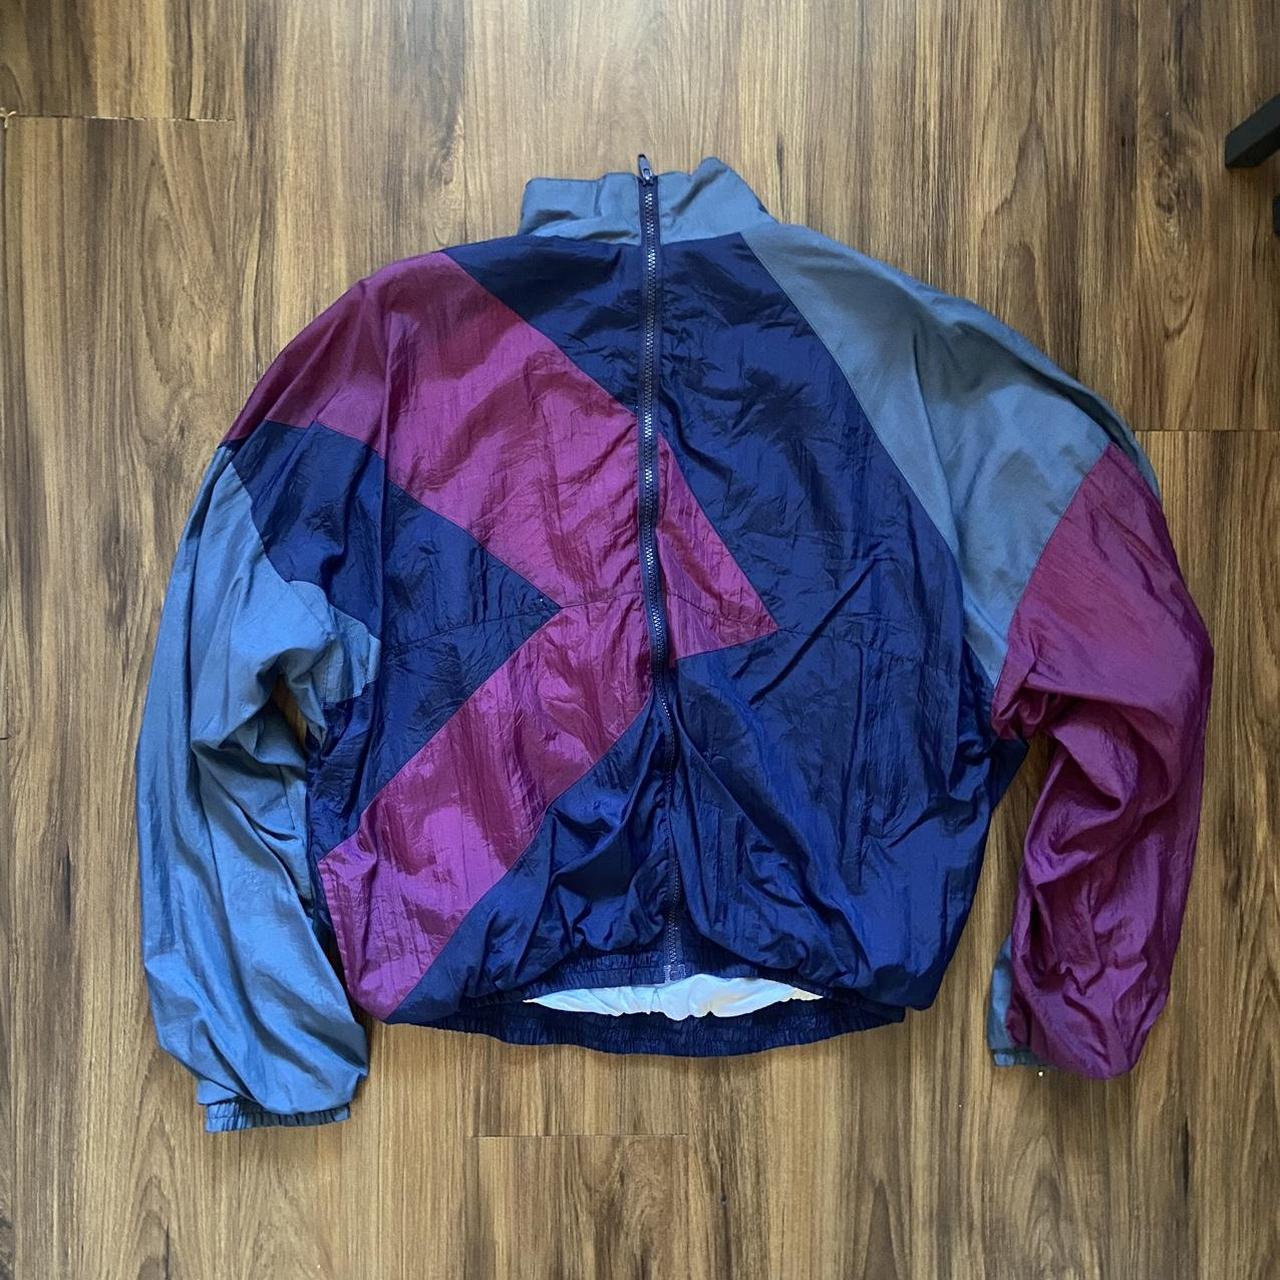 item listed by adamsresell